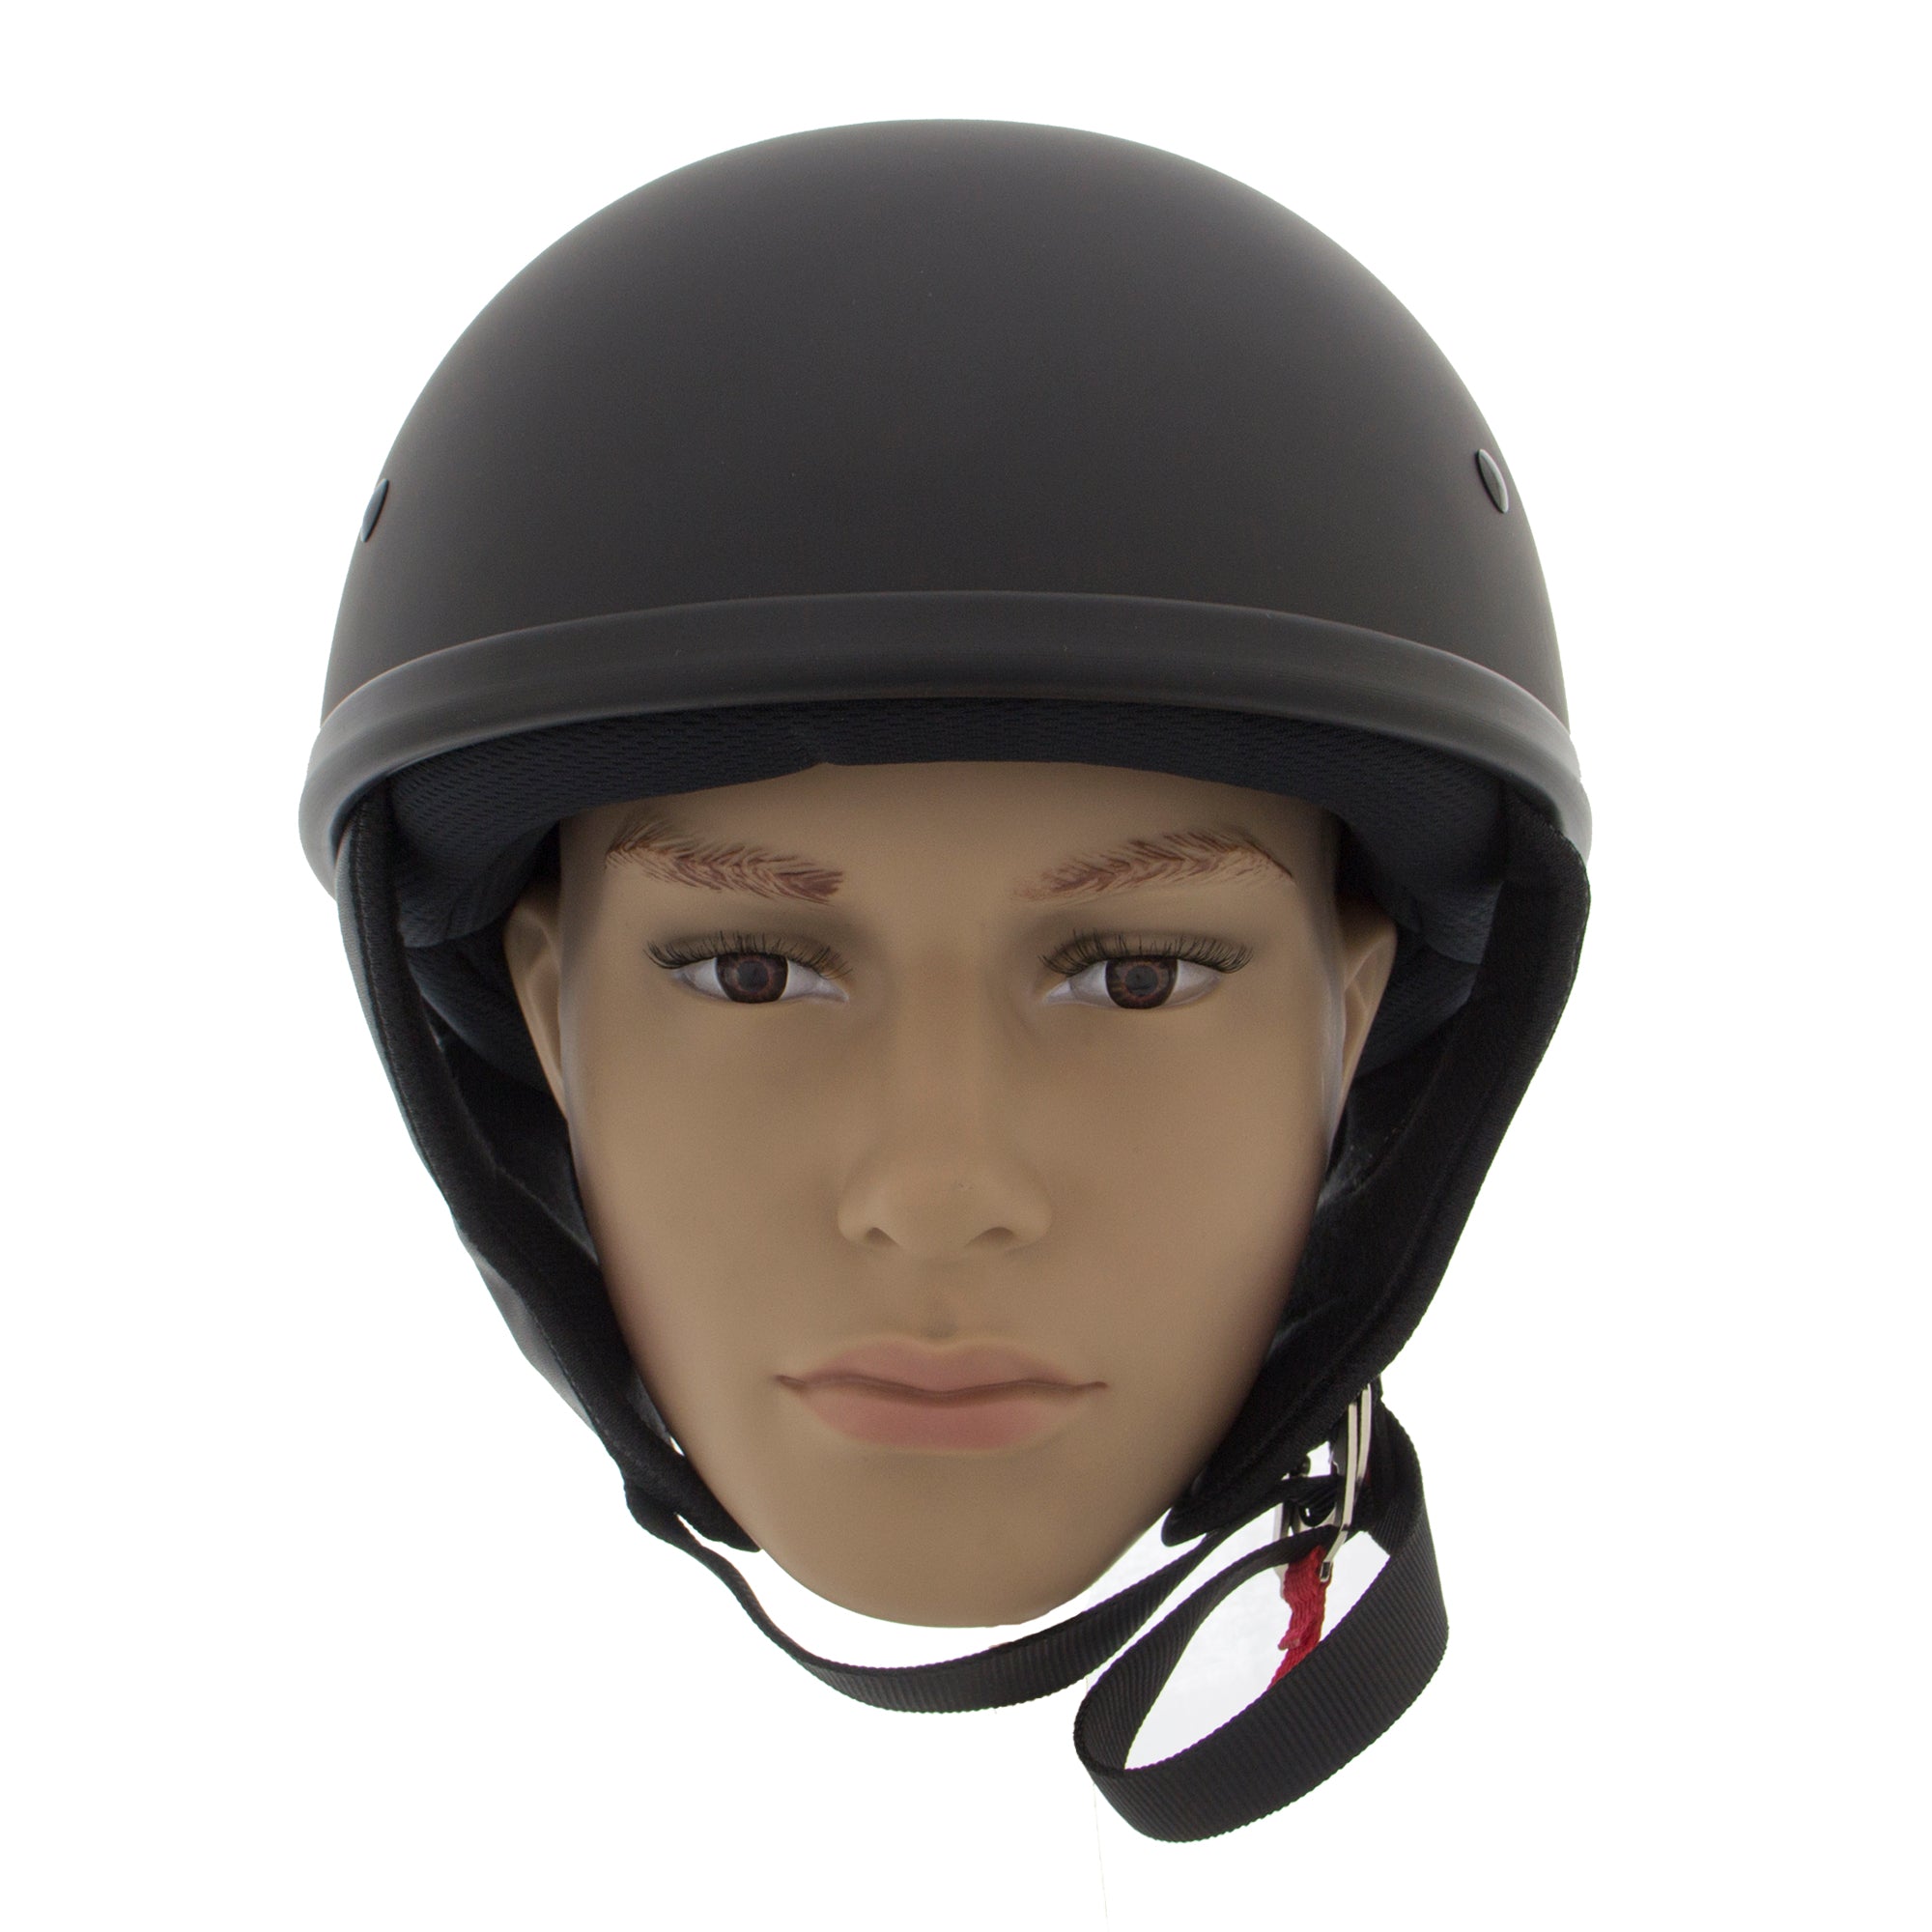 Low Profile Stylish Half Motorcycle Helmet Matte Black With Flames